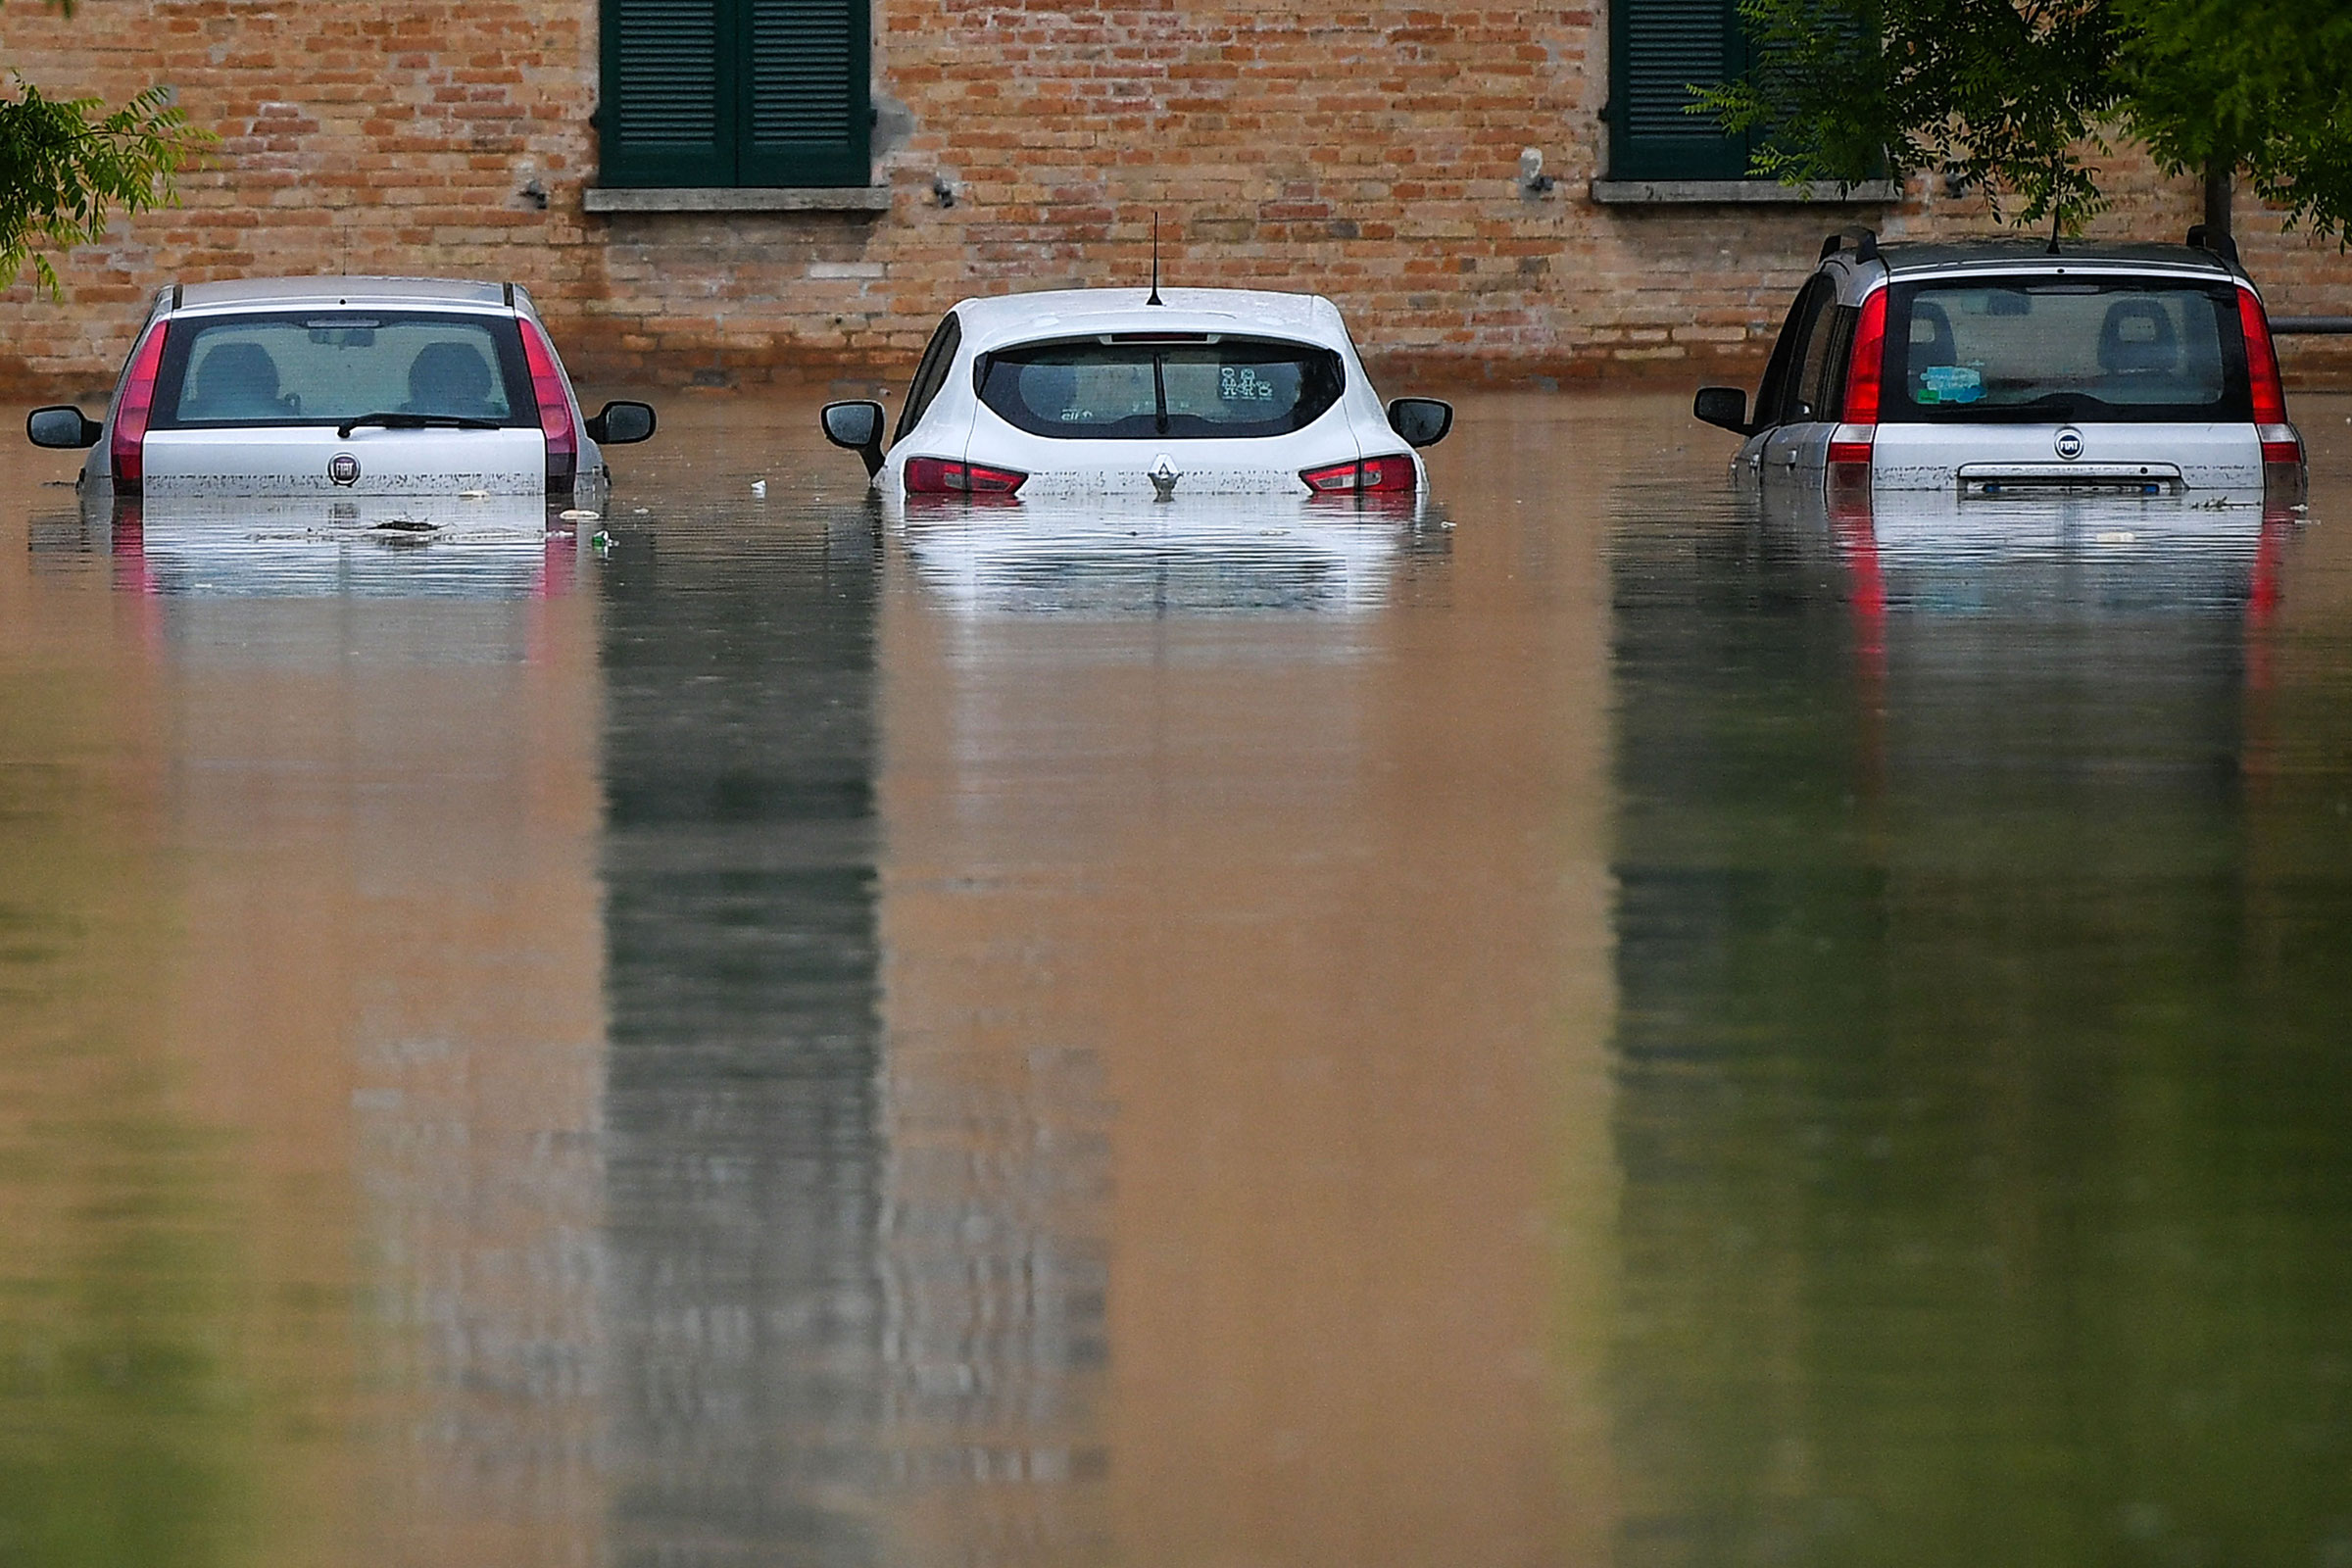 Flooded cars are pictured in a street of Cesena on May 17.